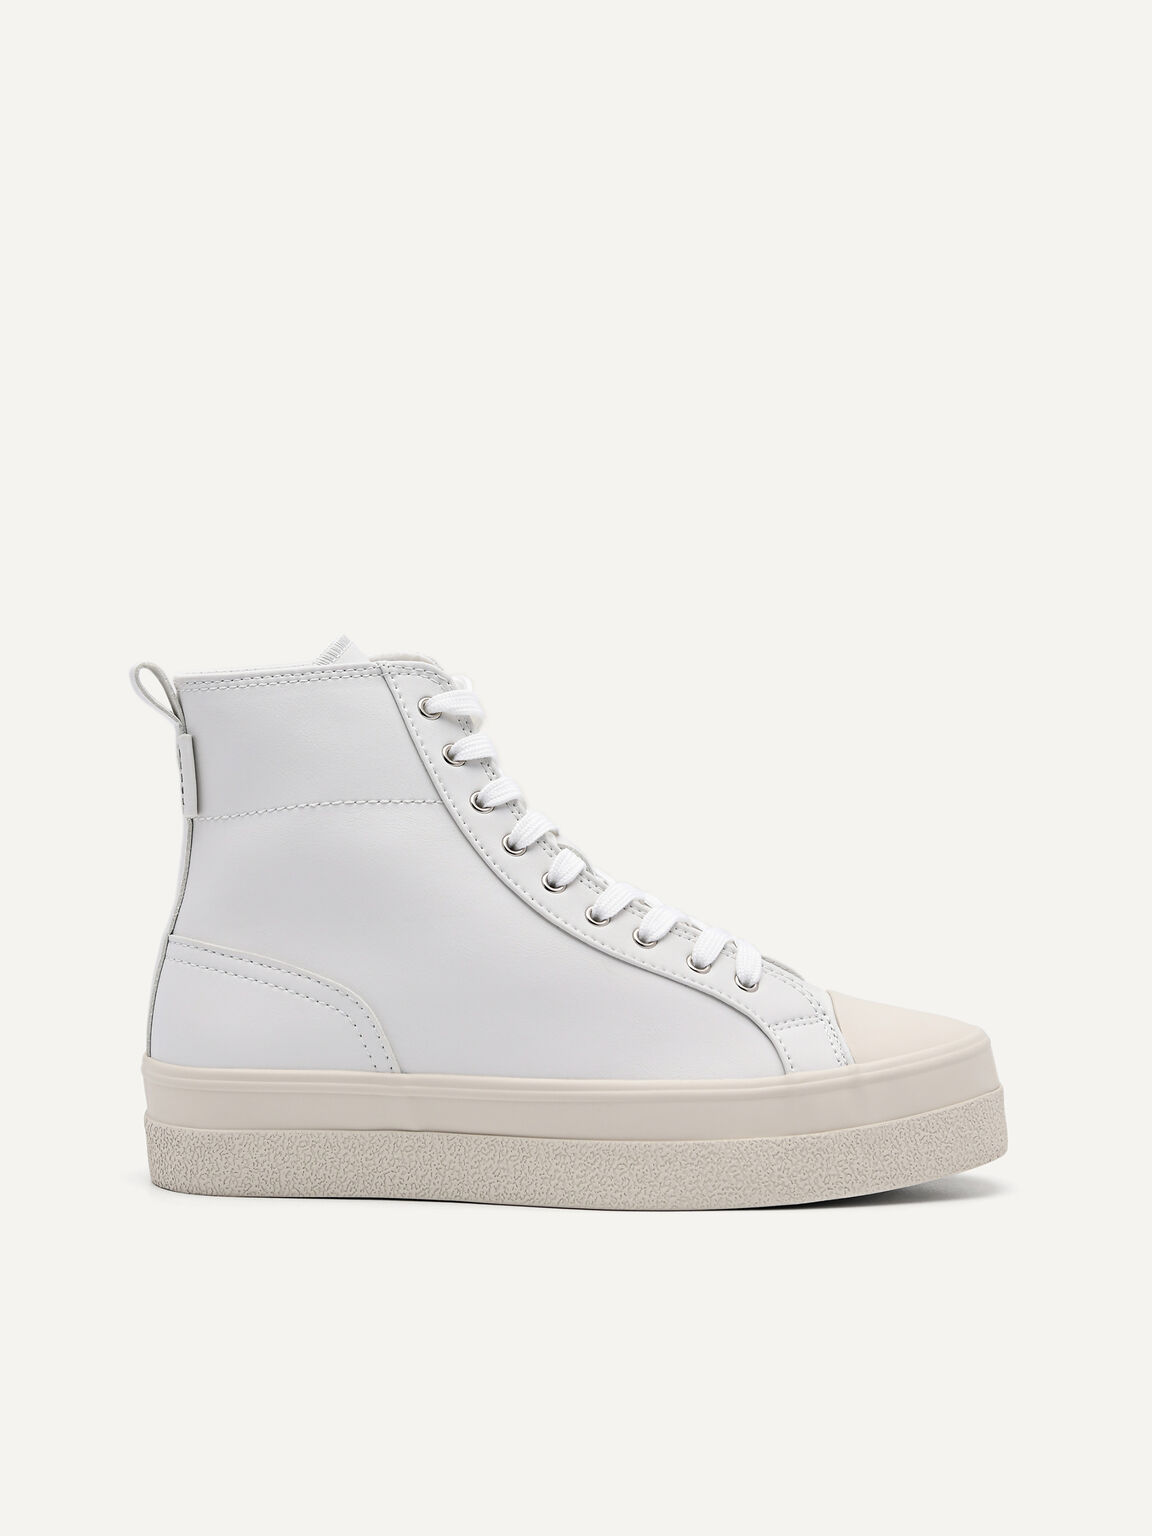 Synthetic Leather High-Cut Sneakers, White